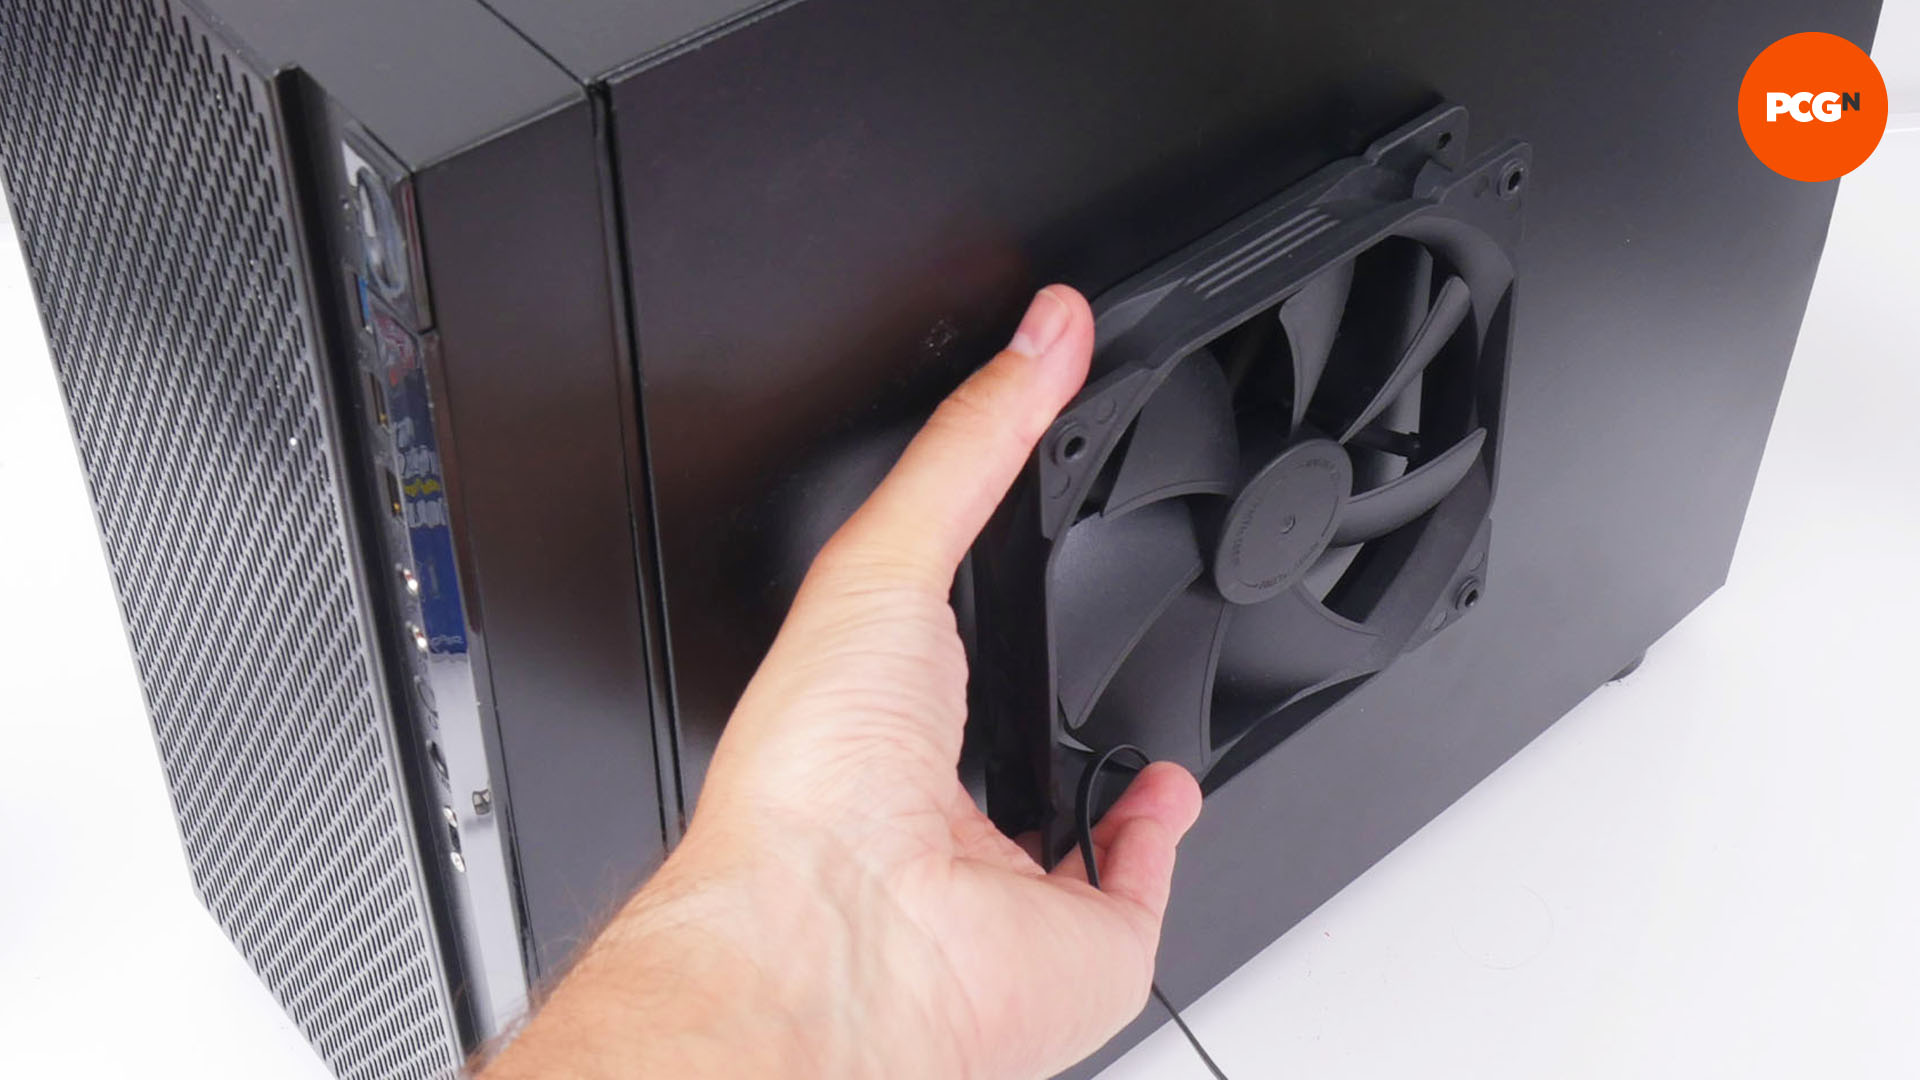 How to add fan mounts to your PC case: Find best location